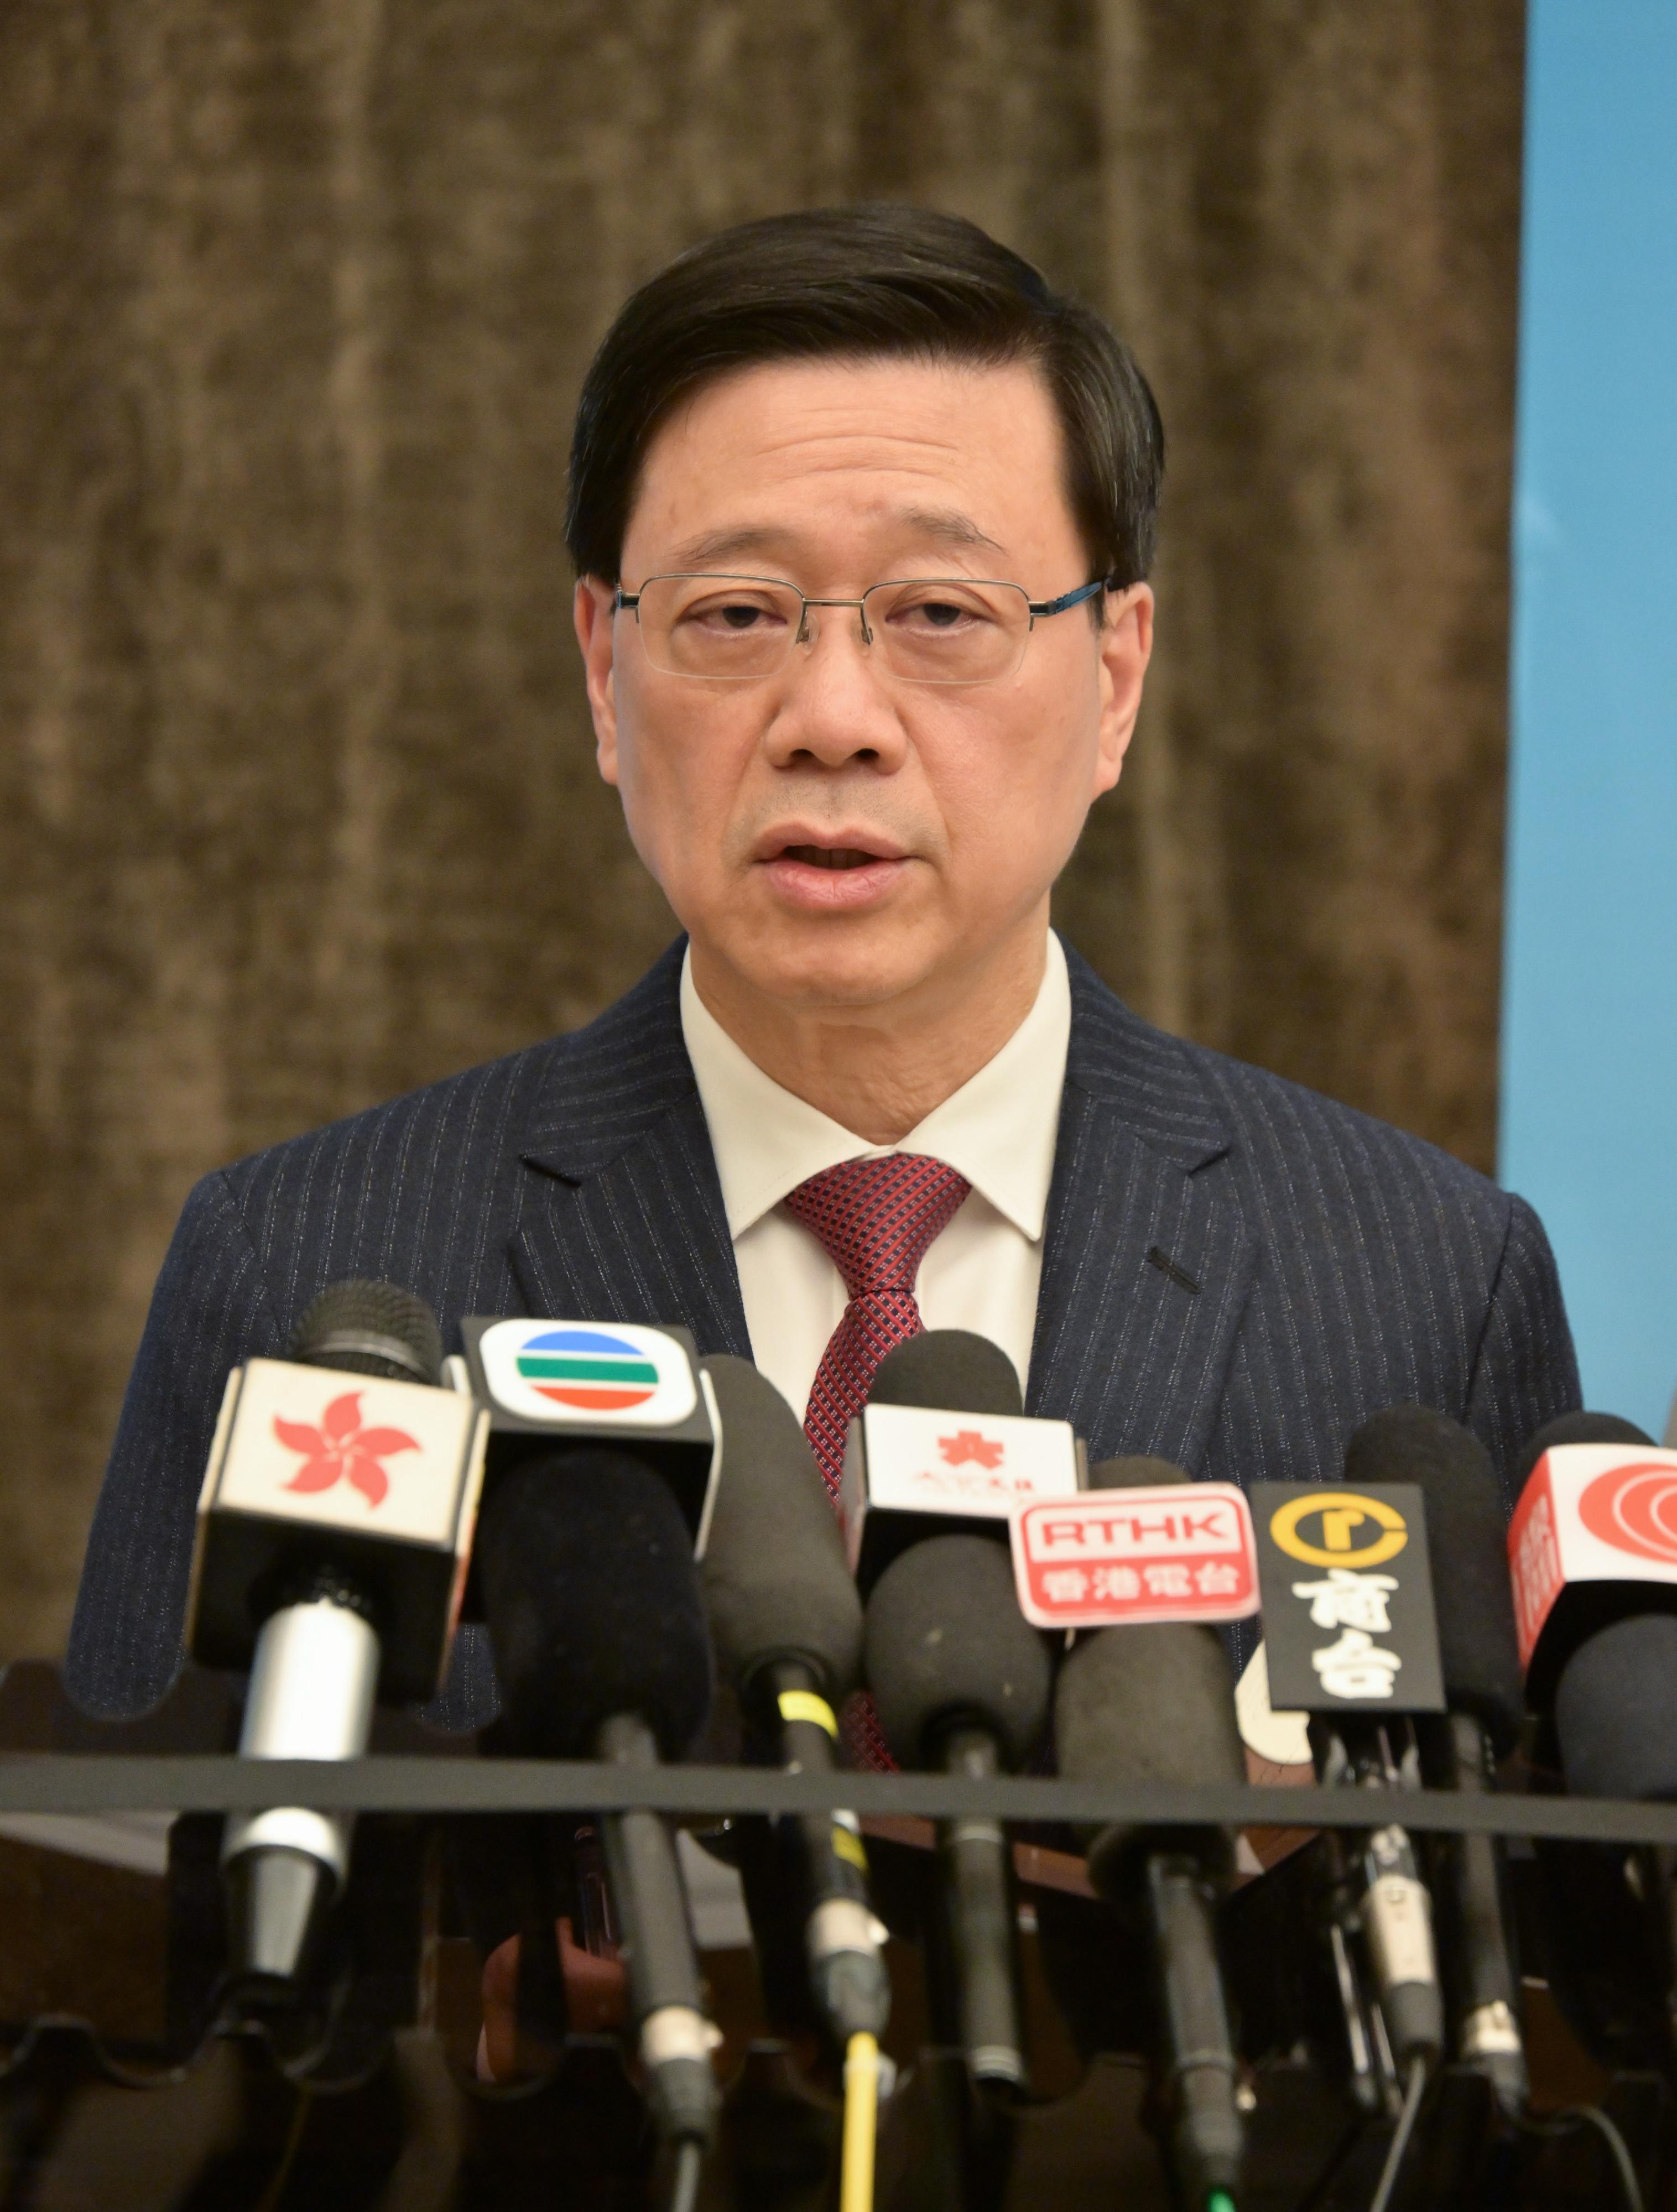 The Chief Executive, Mr John Lee, led a high-level Hong Kong Special Administrative Region delegation comprising senior government officials and members of various sectors to participate in the third Belt and Road Forum for International Cooperation. Photo shows Mr Lee meeting the media in Beijing today (October 19).